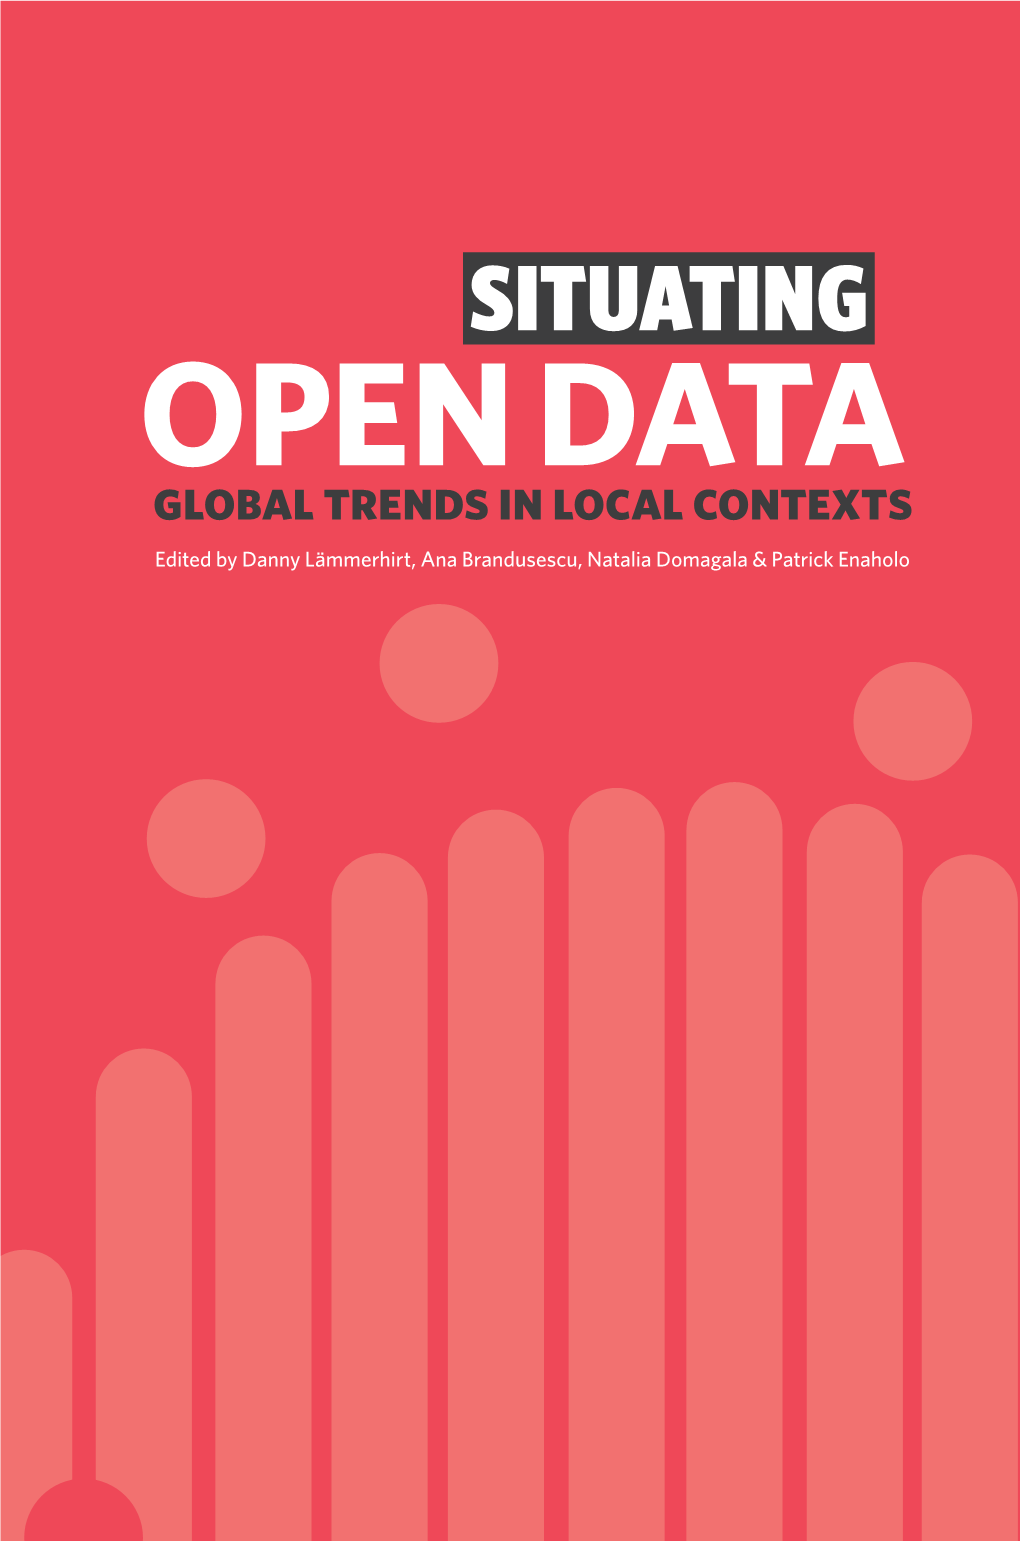 Situating Open Data: Global Trends in Local Contexts